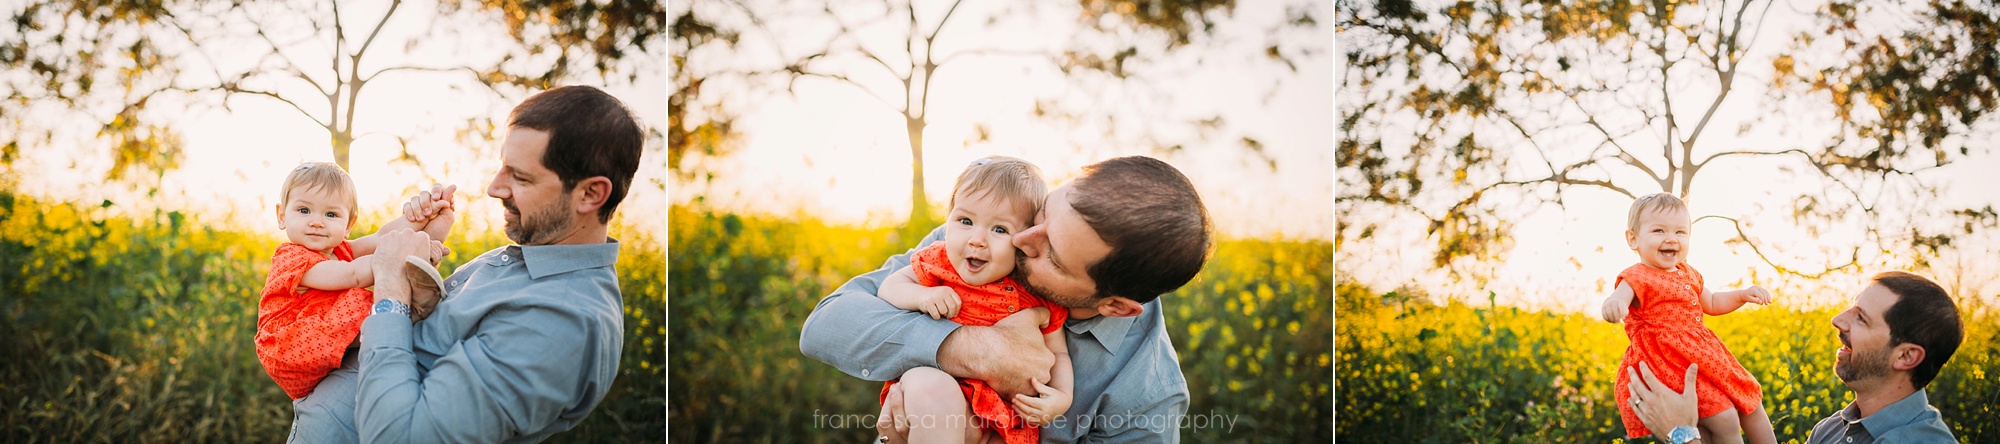 Francesca Marchese Photography father and baby daughter family photography session in orange county